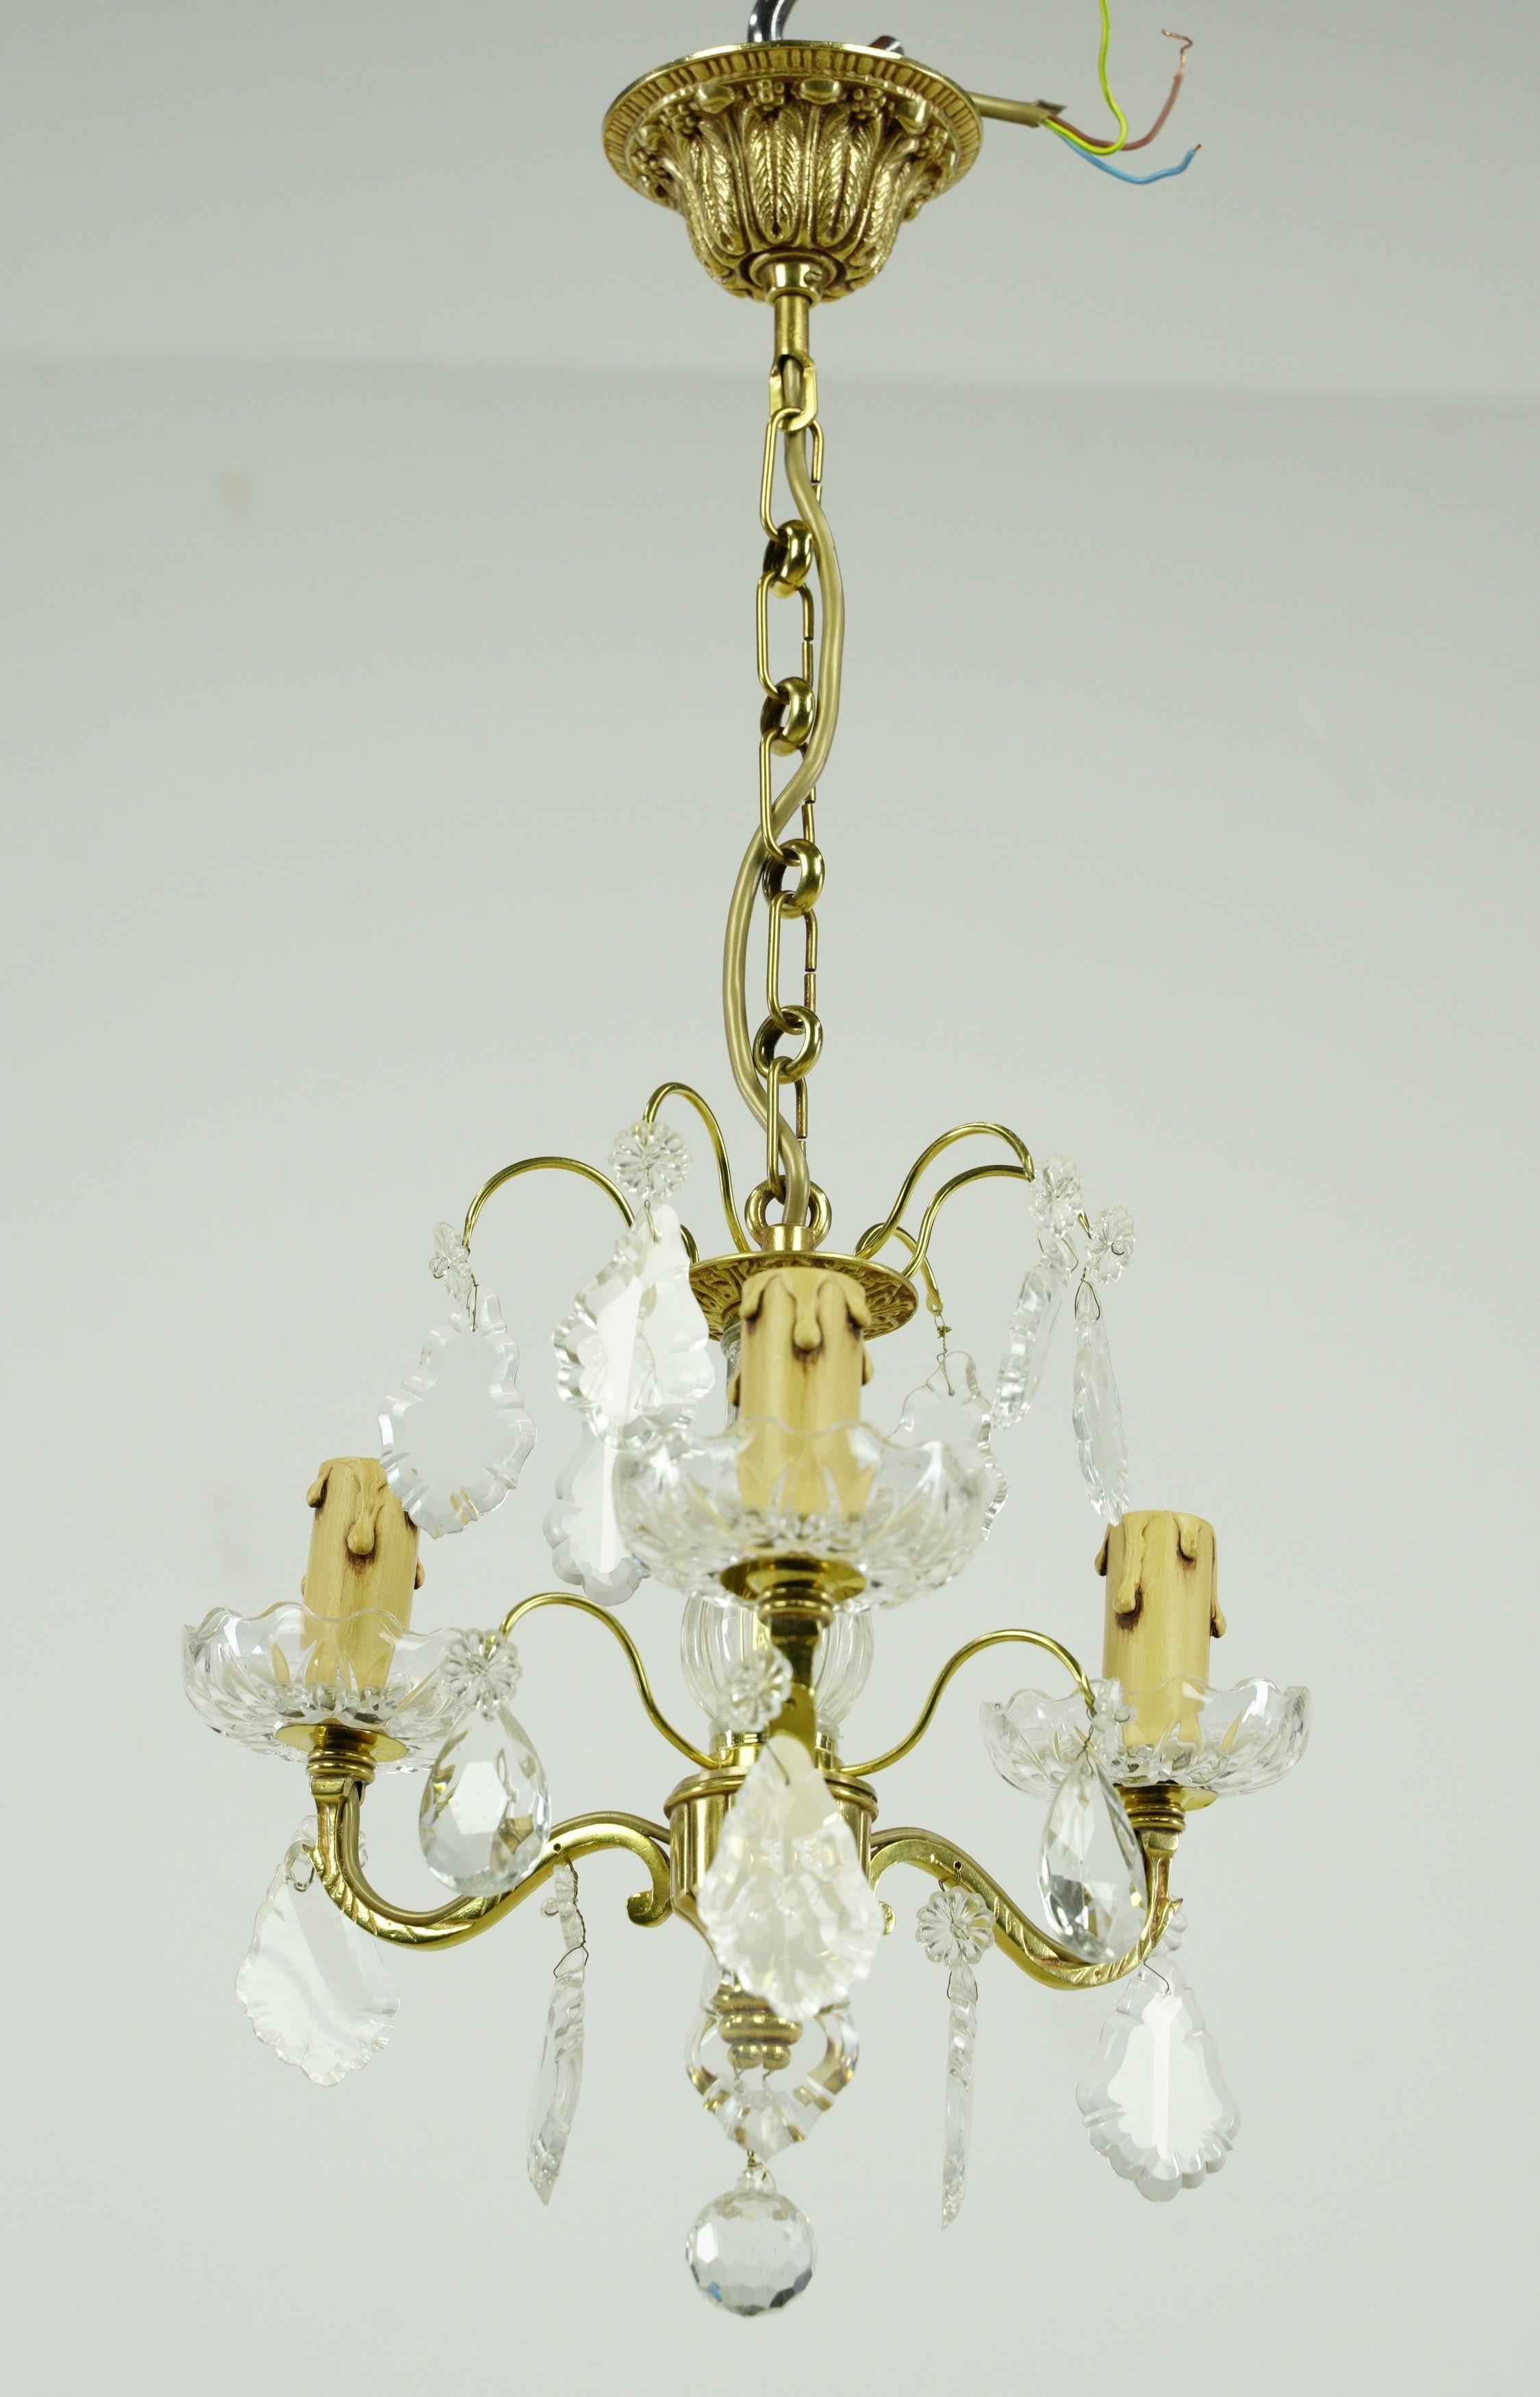 This chandelier features an ornate brass frame intricately designed to complement its petite size, adorned with clear crystals that contribute to its refined and timeless allure. This enchanting piece was sourced from an esteemed estate in